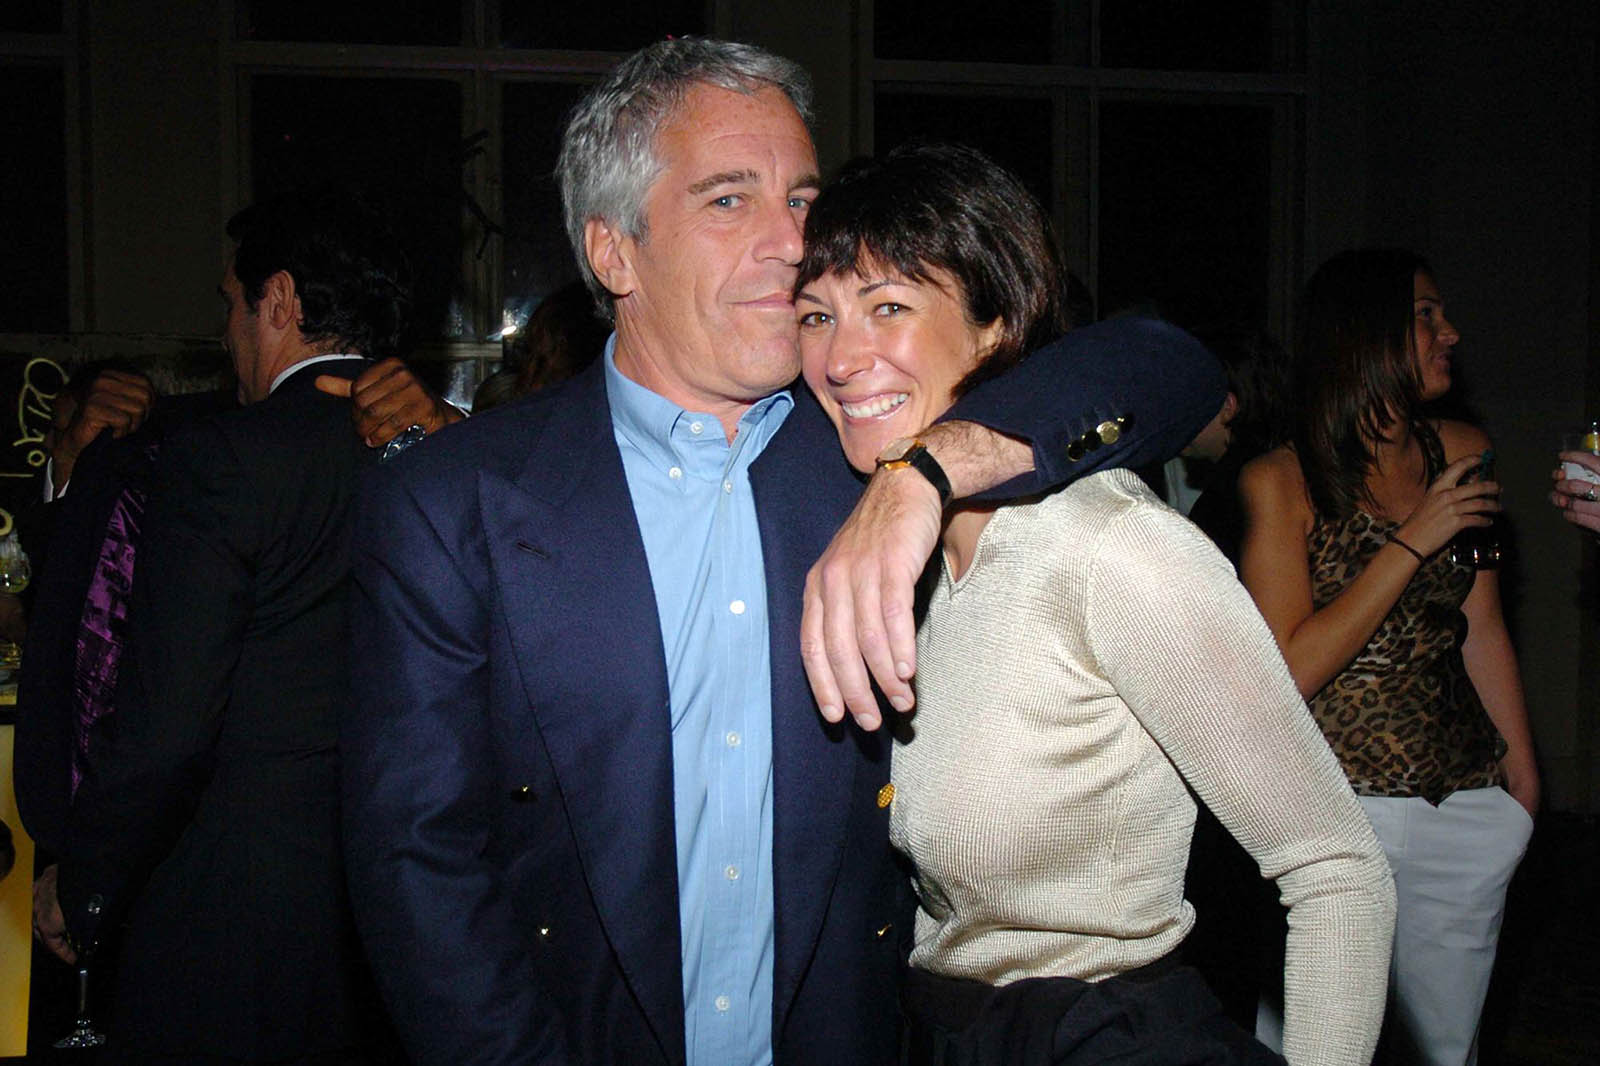 Since it was revealed that Ghislaine Maxwell was married, everyone assumed it was Jeffrey Epstein. But now, we may know the identity of her husband.